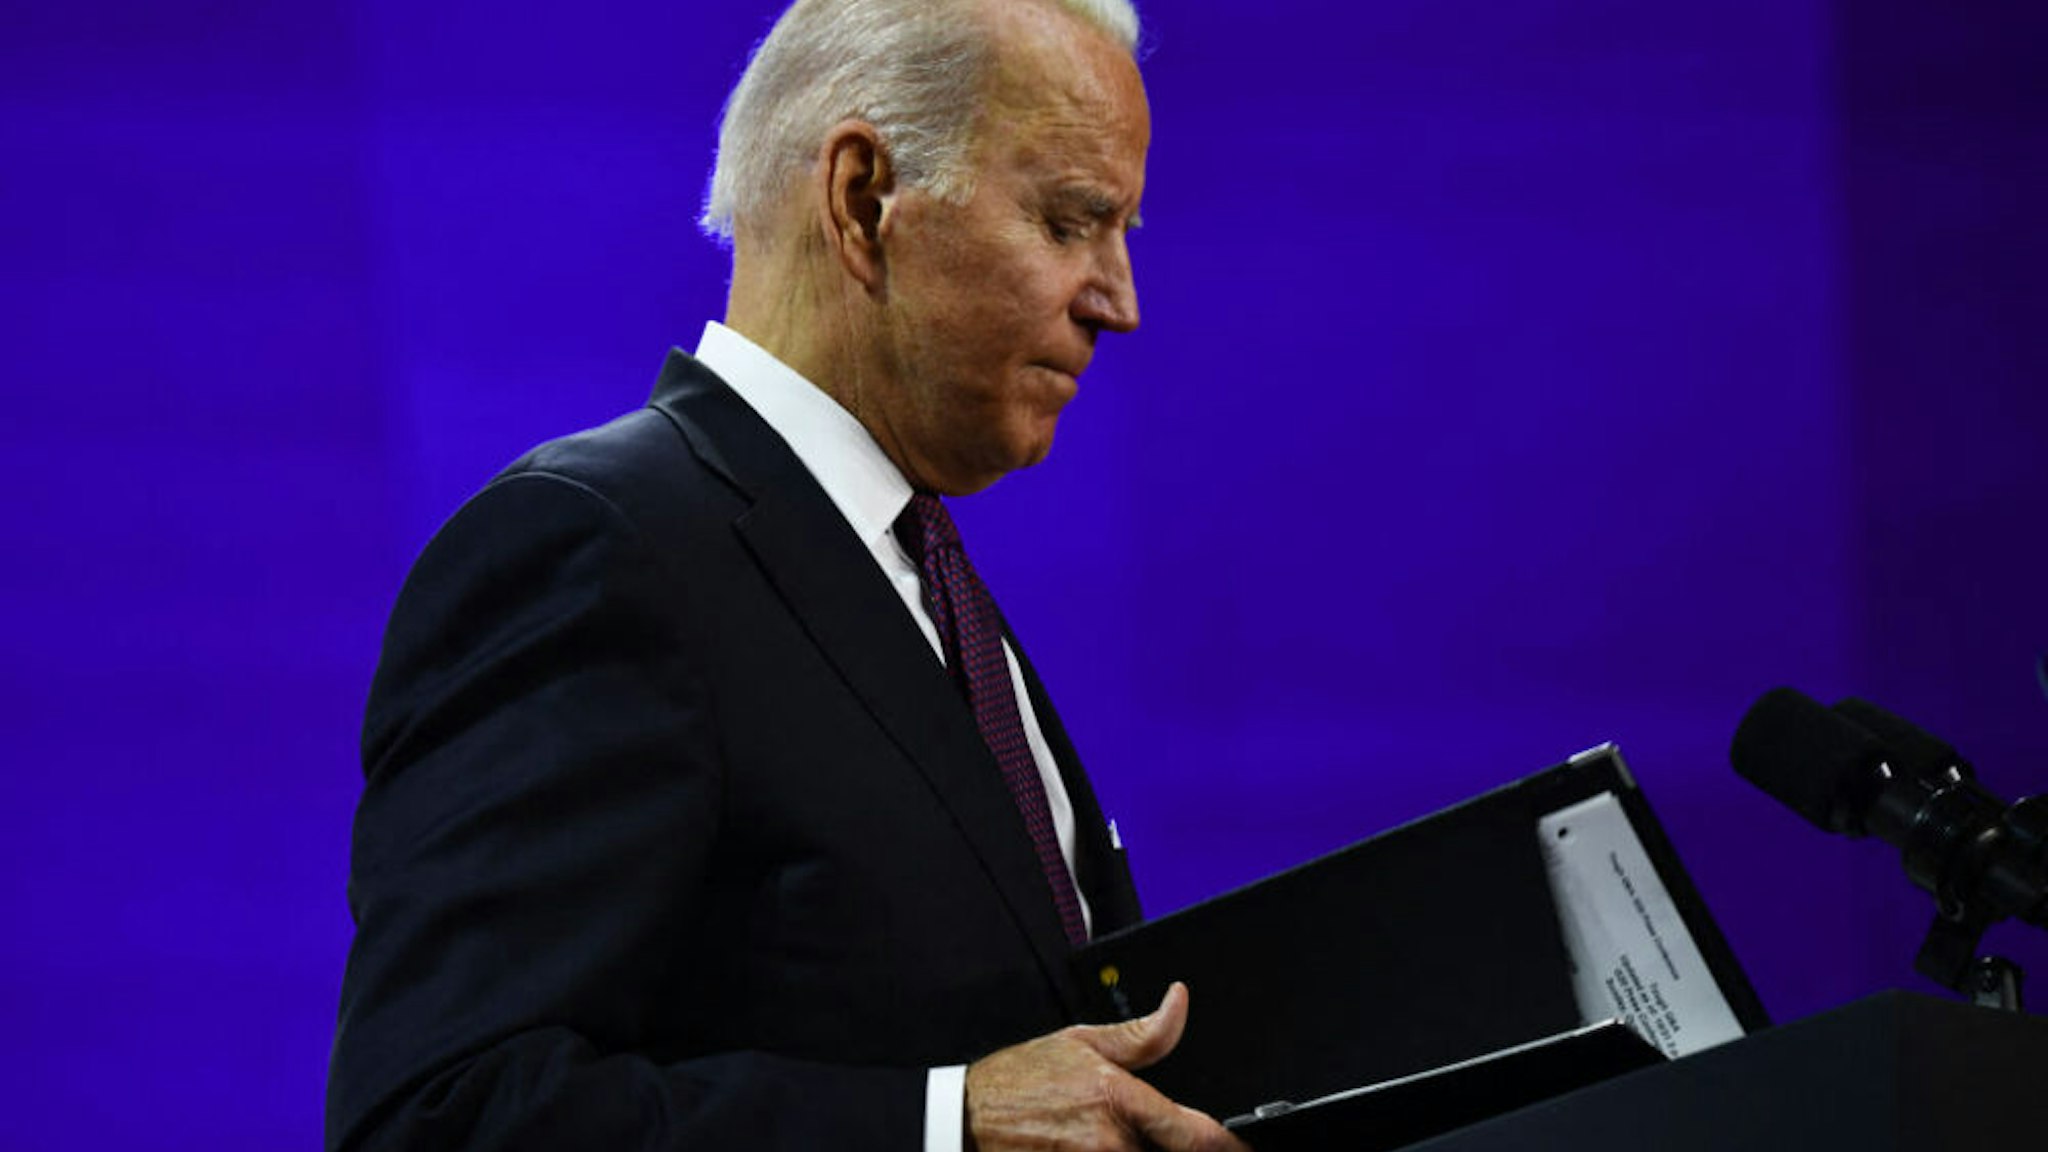 US President Joe Biden addresses a press conference at the end of the G20 of World Leaders Summit on October 31, 2021 at the convention center "La Nuvola" in the EUR district of Rome.